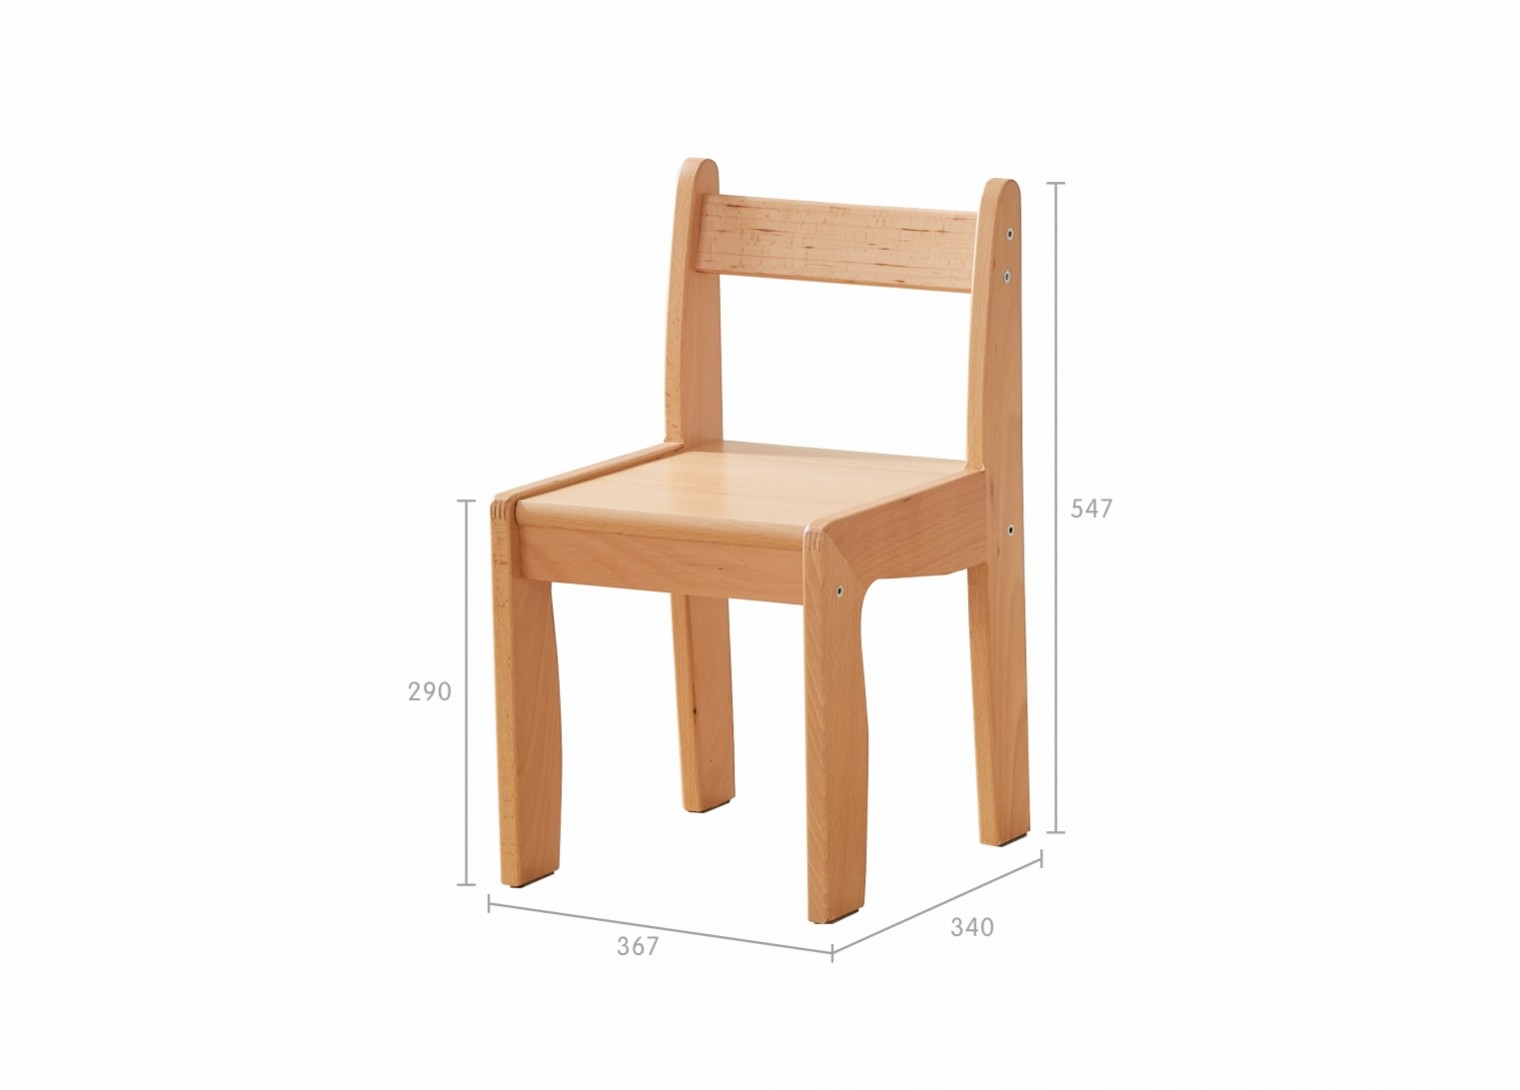 Forest School - 290H Wooden Chair